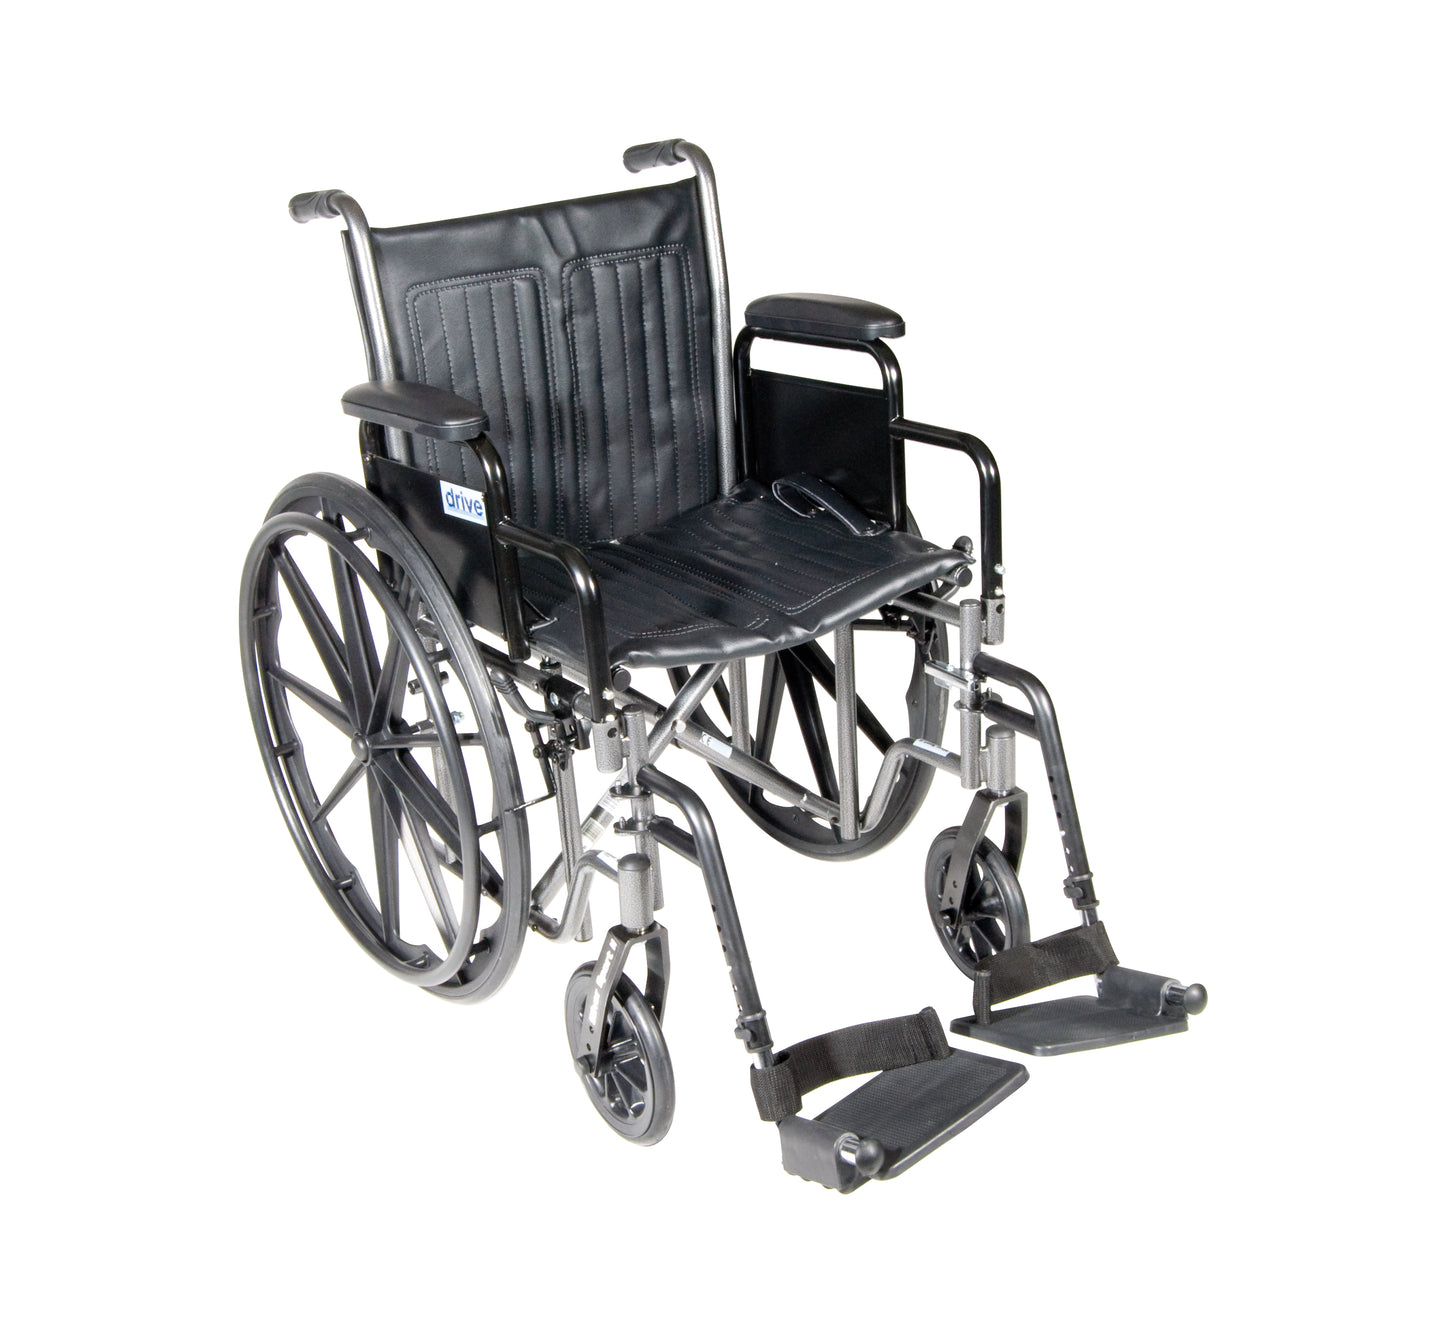 Silver Sport 2 Wheelchair, Detachable Desk Arms, Swing away Footrests, 20" Seat